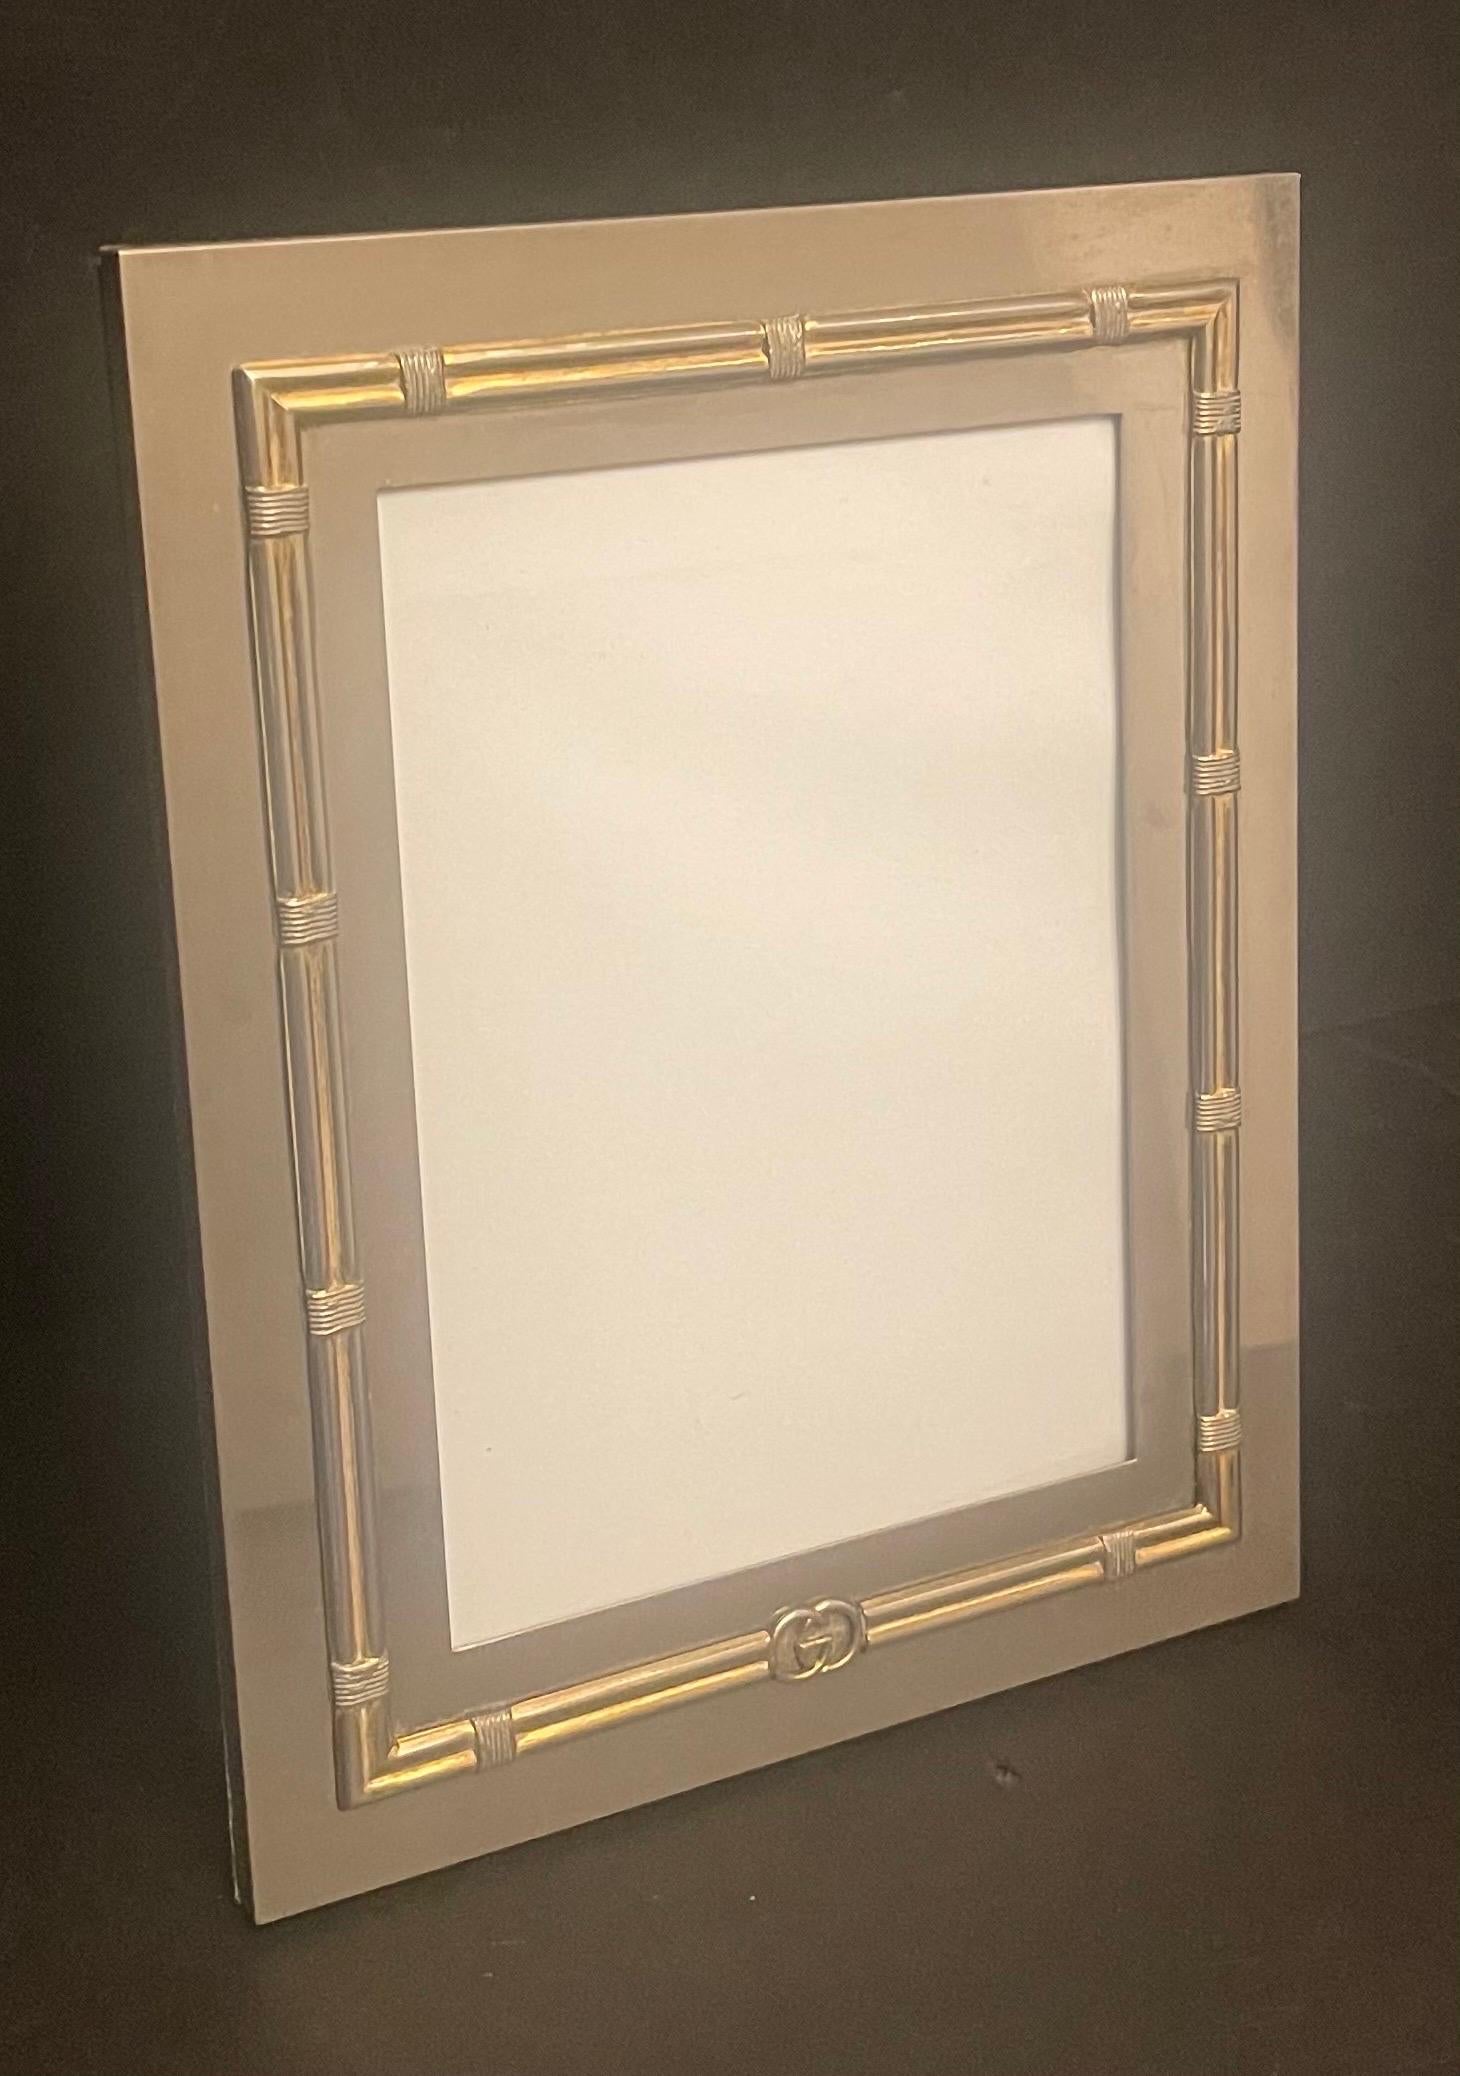 Wonderful vintage Gucci silver-plate picture frame embellished with a gilt brass border and the GUCCI emblem on the center bottom, the back of exotic wood veneer.
Measurements:
10